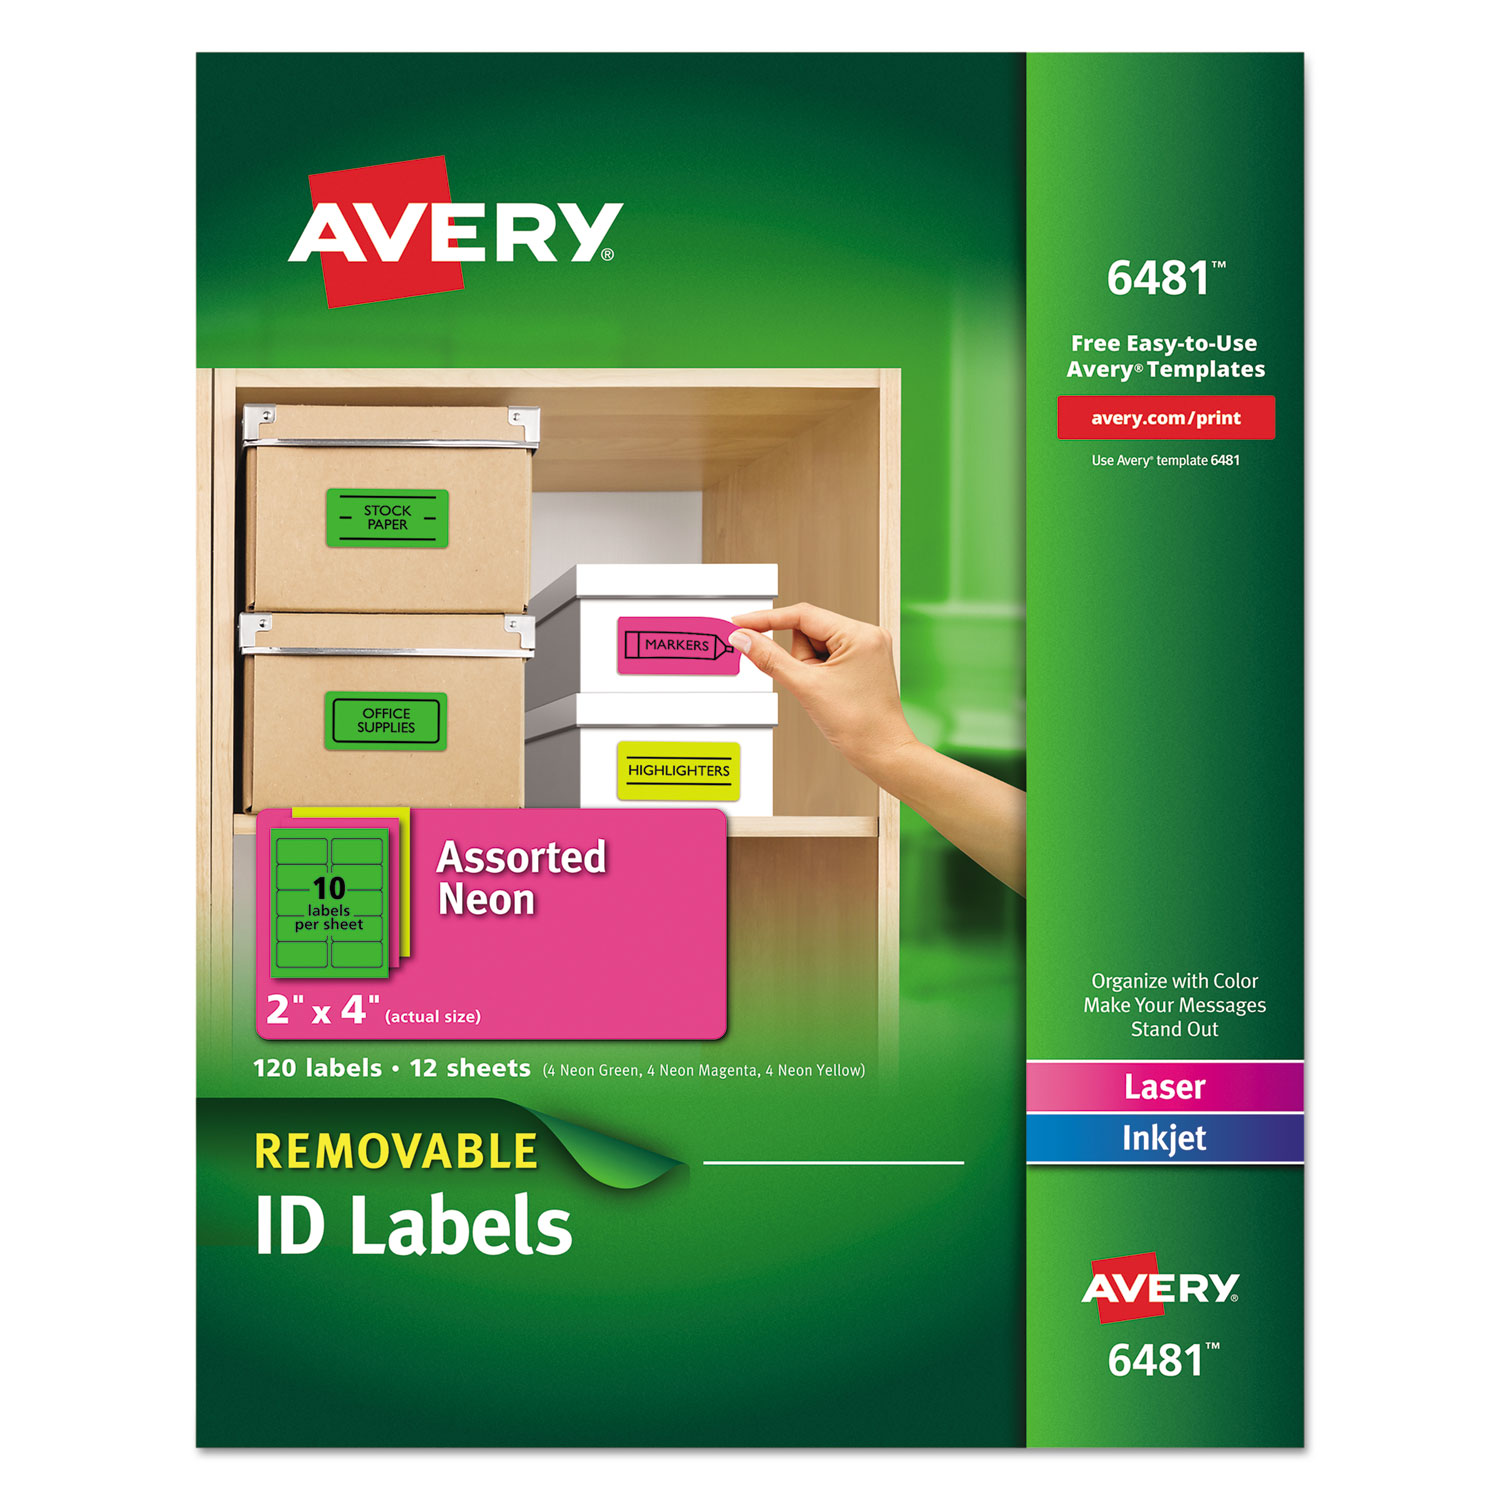  Avery 06481 High-Vis Removable Laser/Inkjet ID Labels, 2 x 4, Asst. Neon, 120/Pack (AVE6481) 